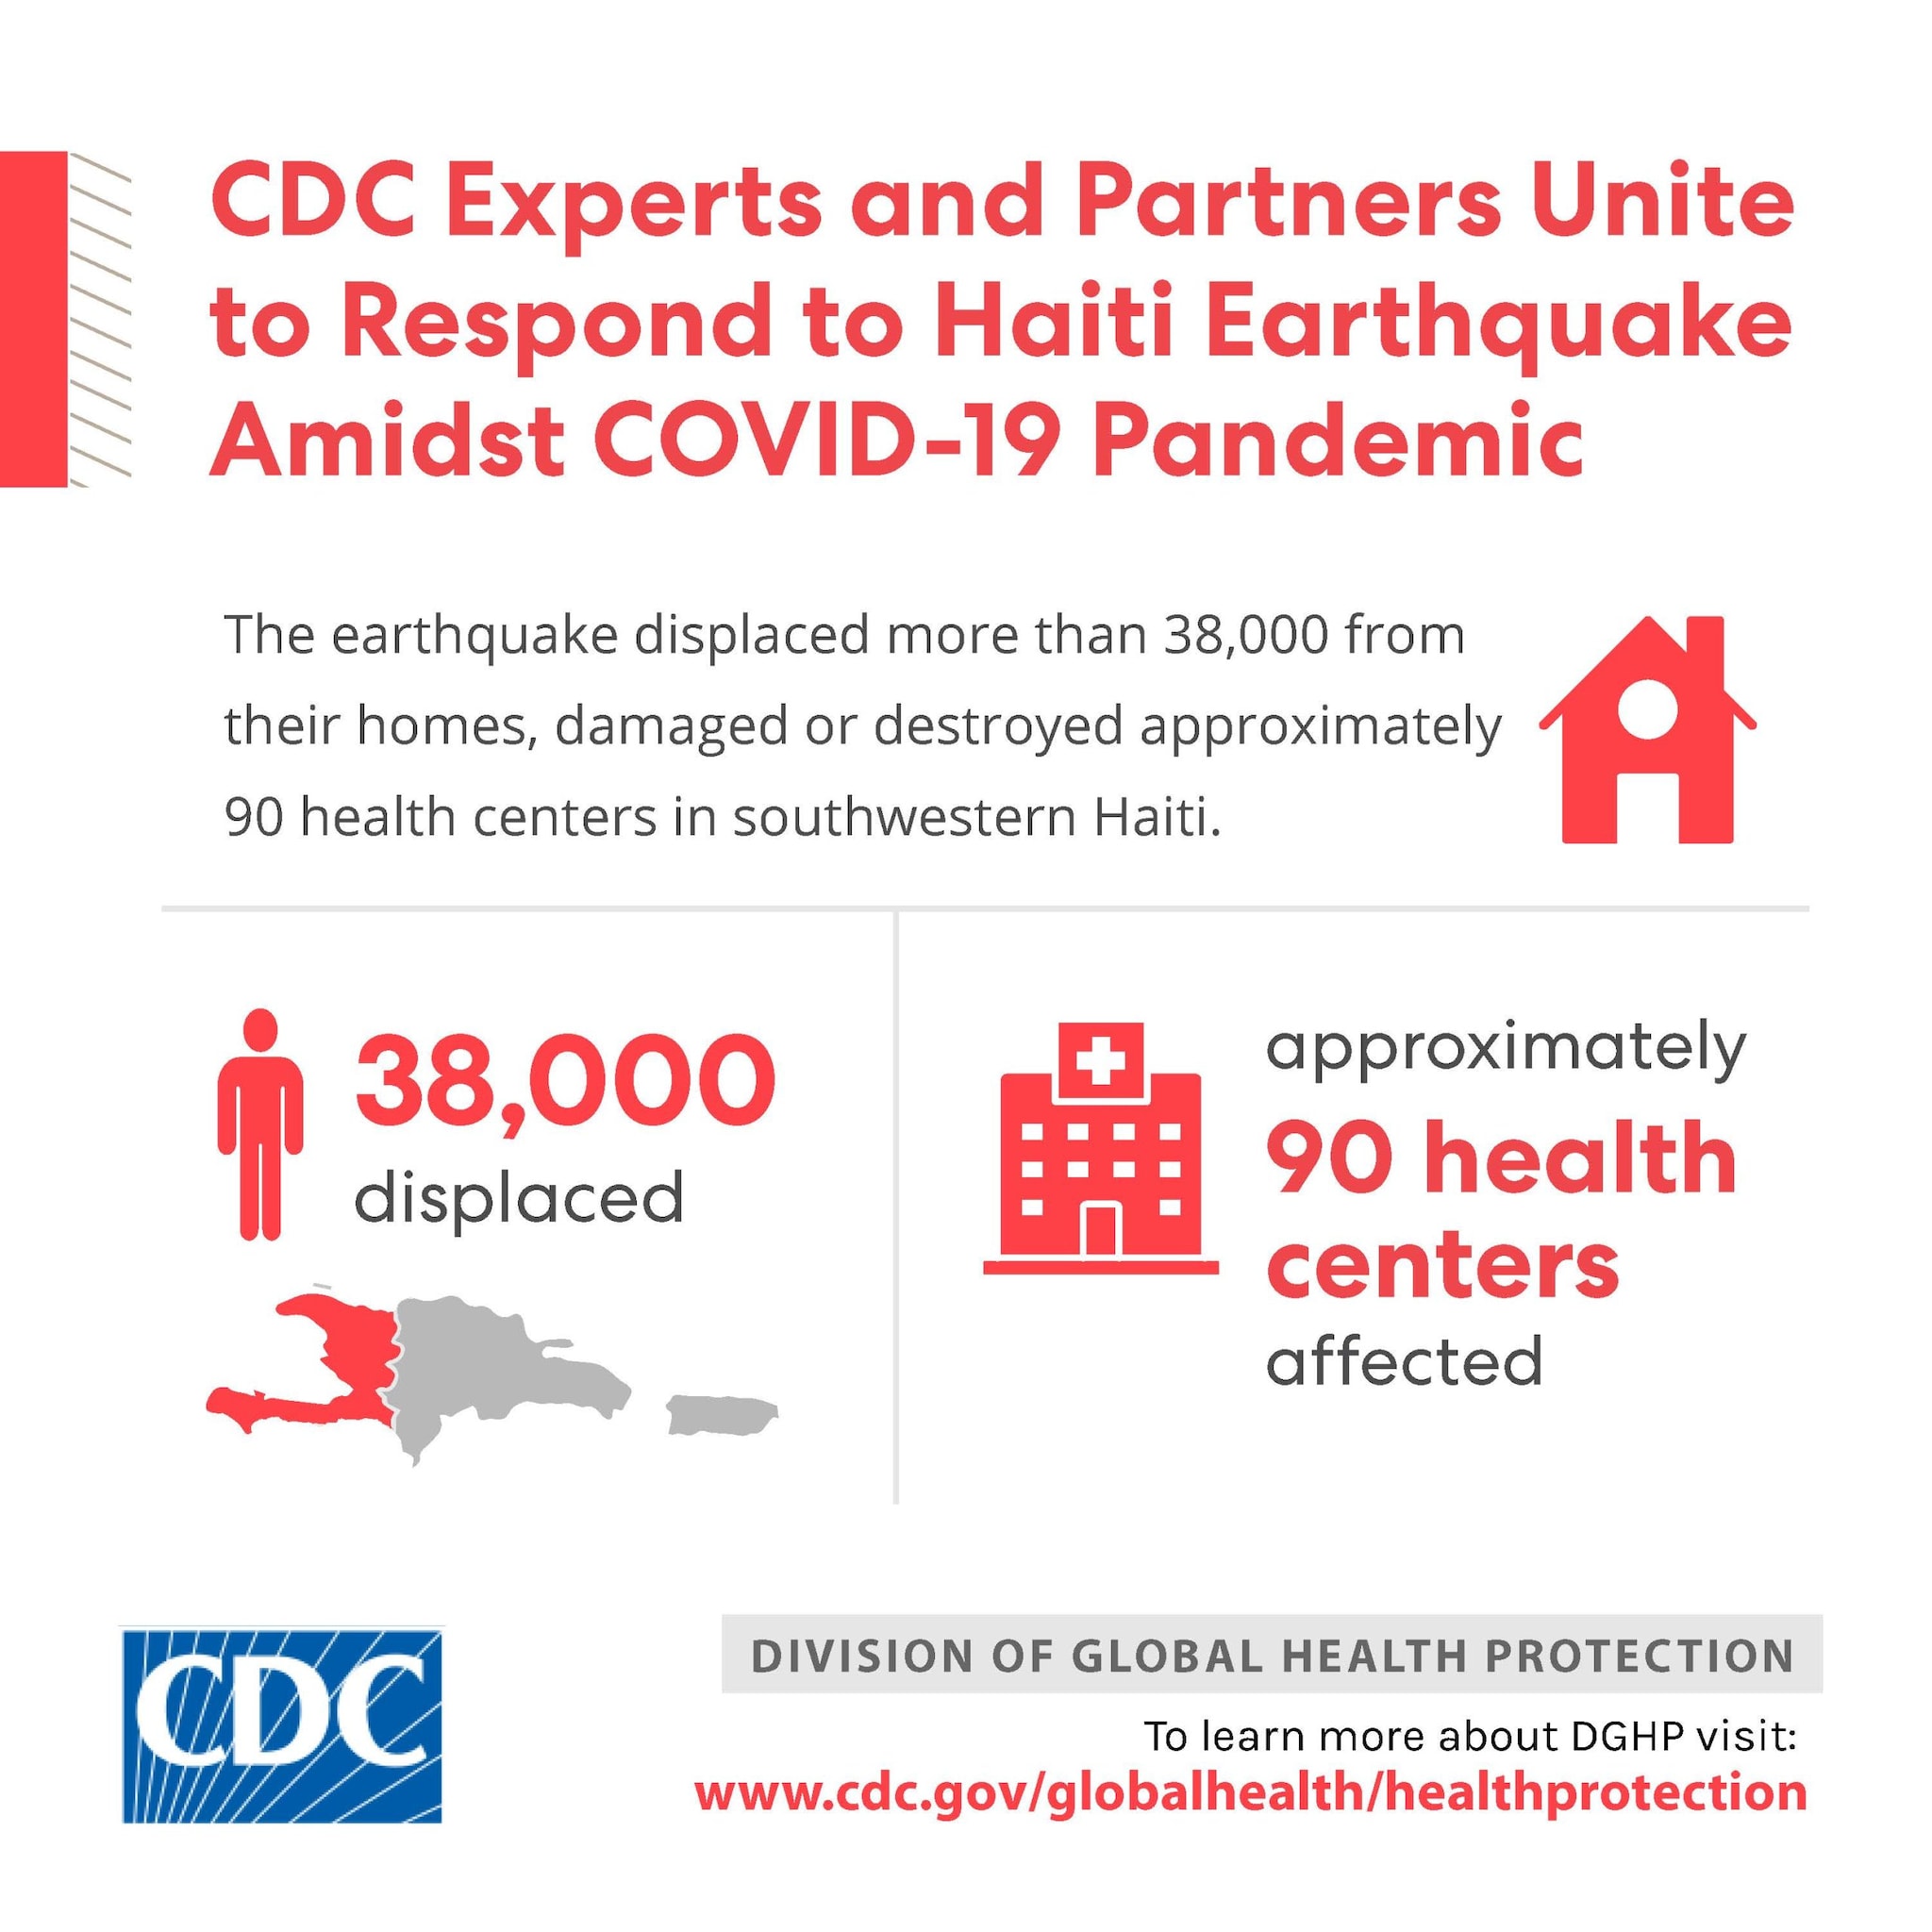 CDC Experts and Partners Unite to Respond to Haiti Earthquake Amidst COVID-19 Pandemic